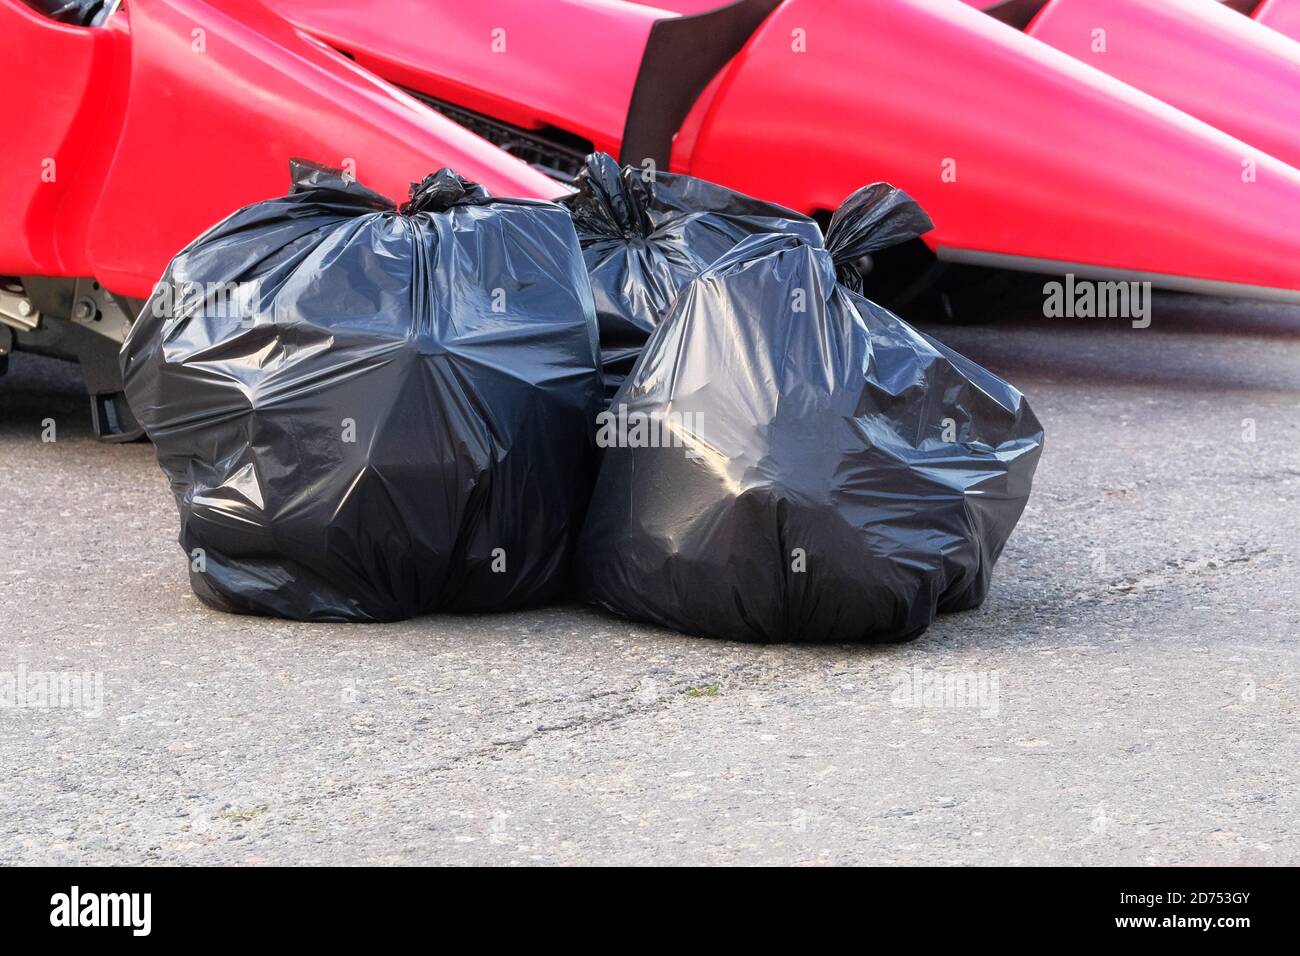 https://c8.alamy.com/comp/2D753GY/garbage-plastic-black-bags-waste-at-walkway-community-village-plastic-bags-of-waste-2D753GY.jpg